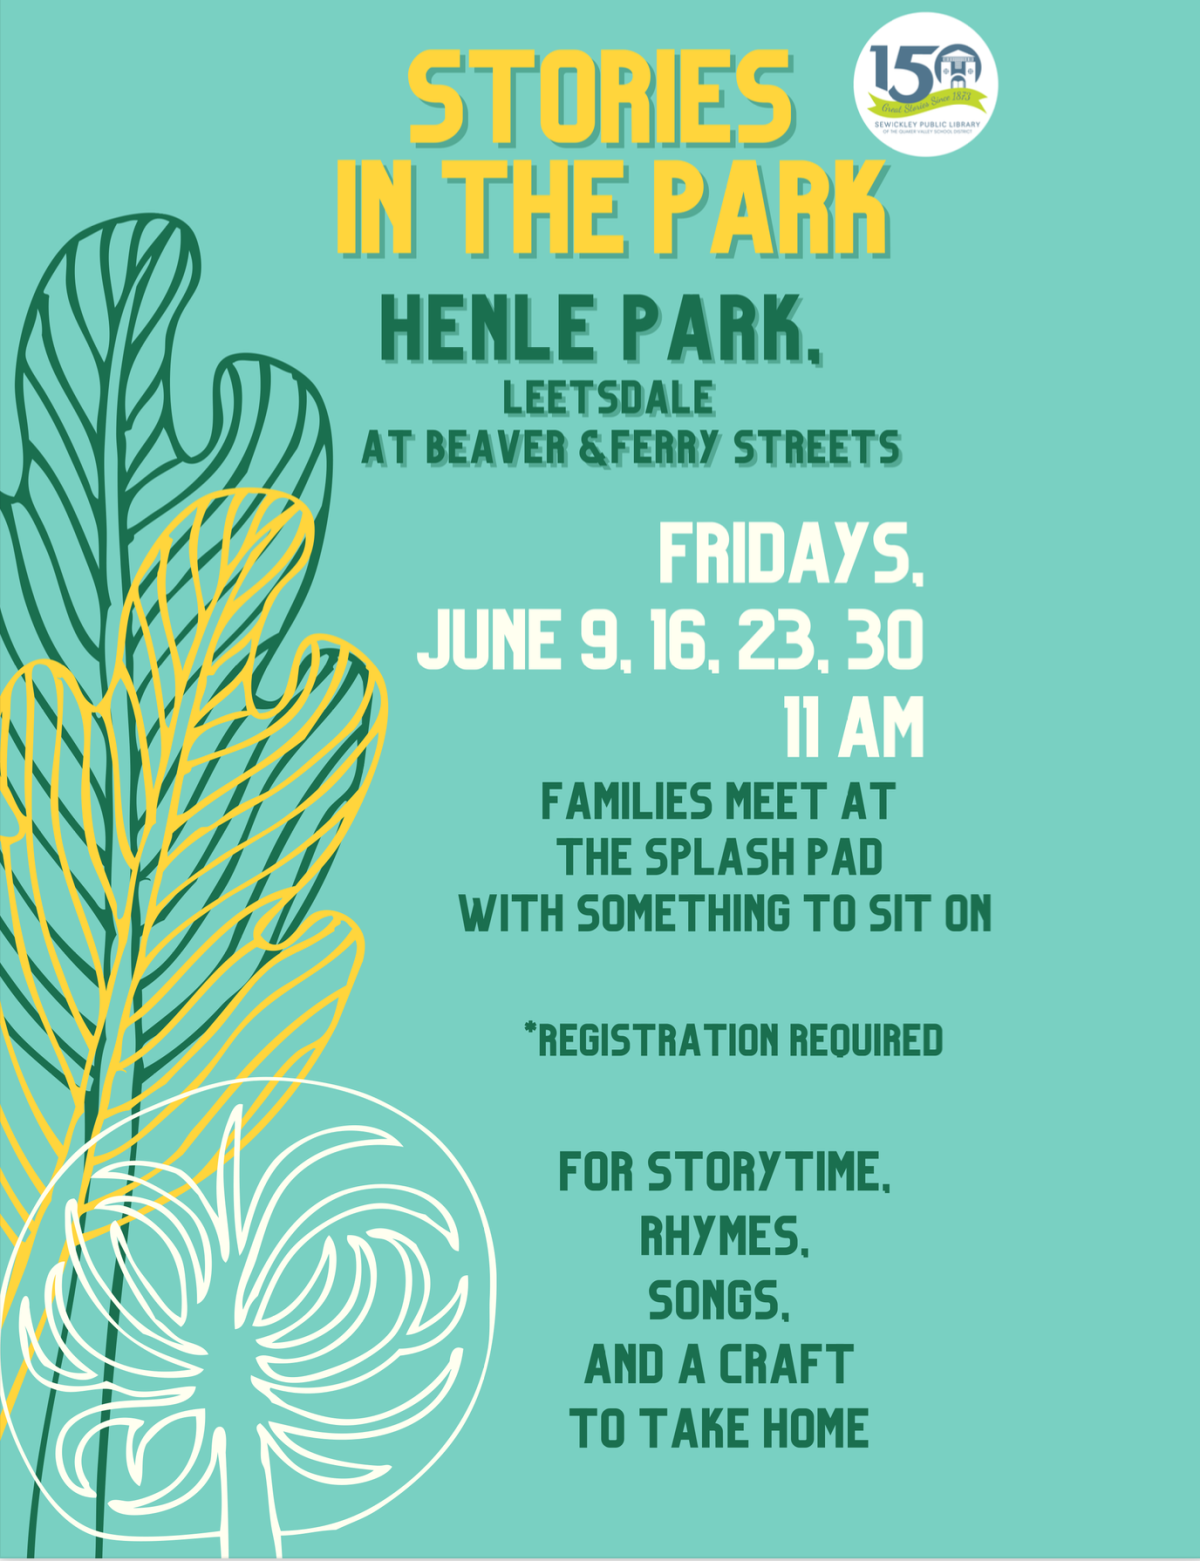 Sewickley Library Stories in the Park - Henle Park Flyer